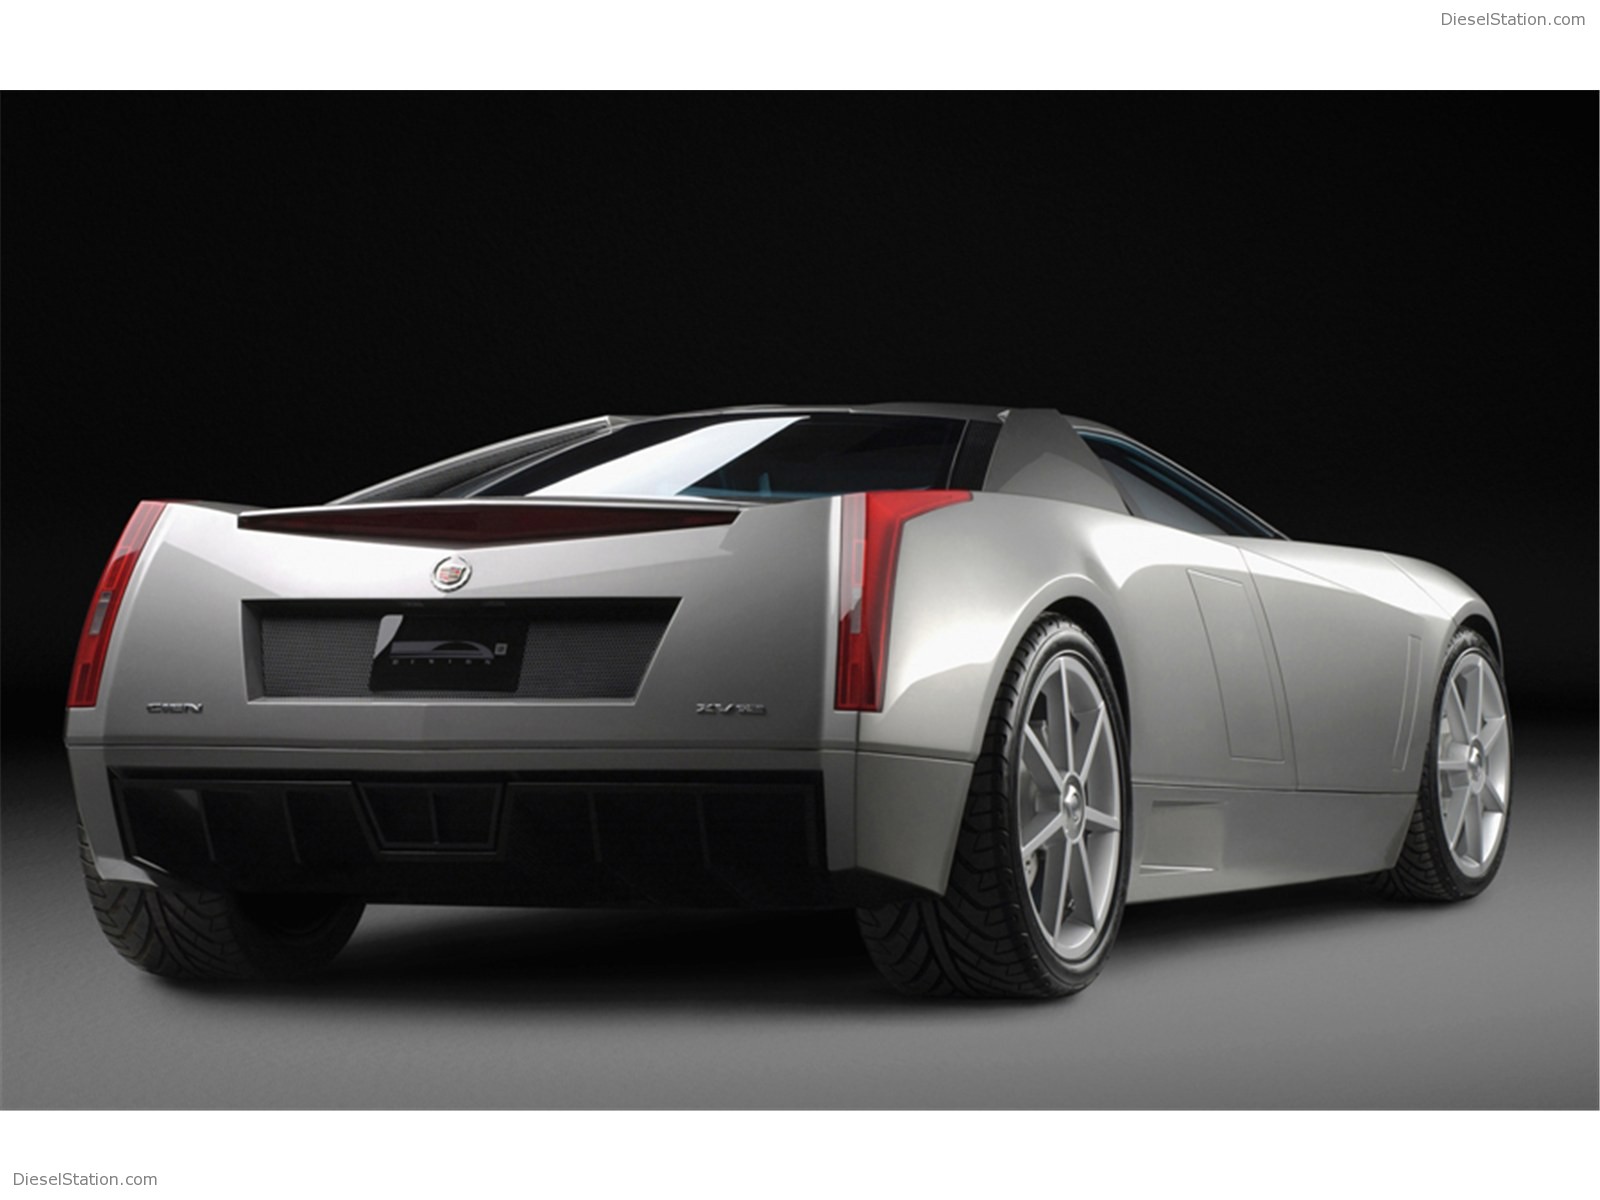 Amazing Cadillac Evoq Concept Pictures & Backgrounds